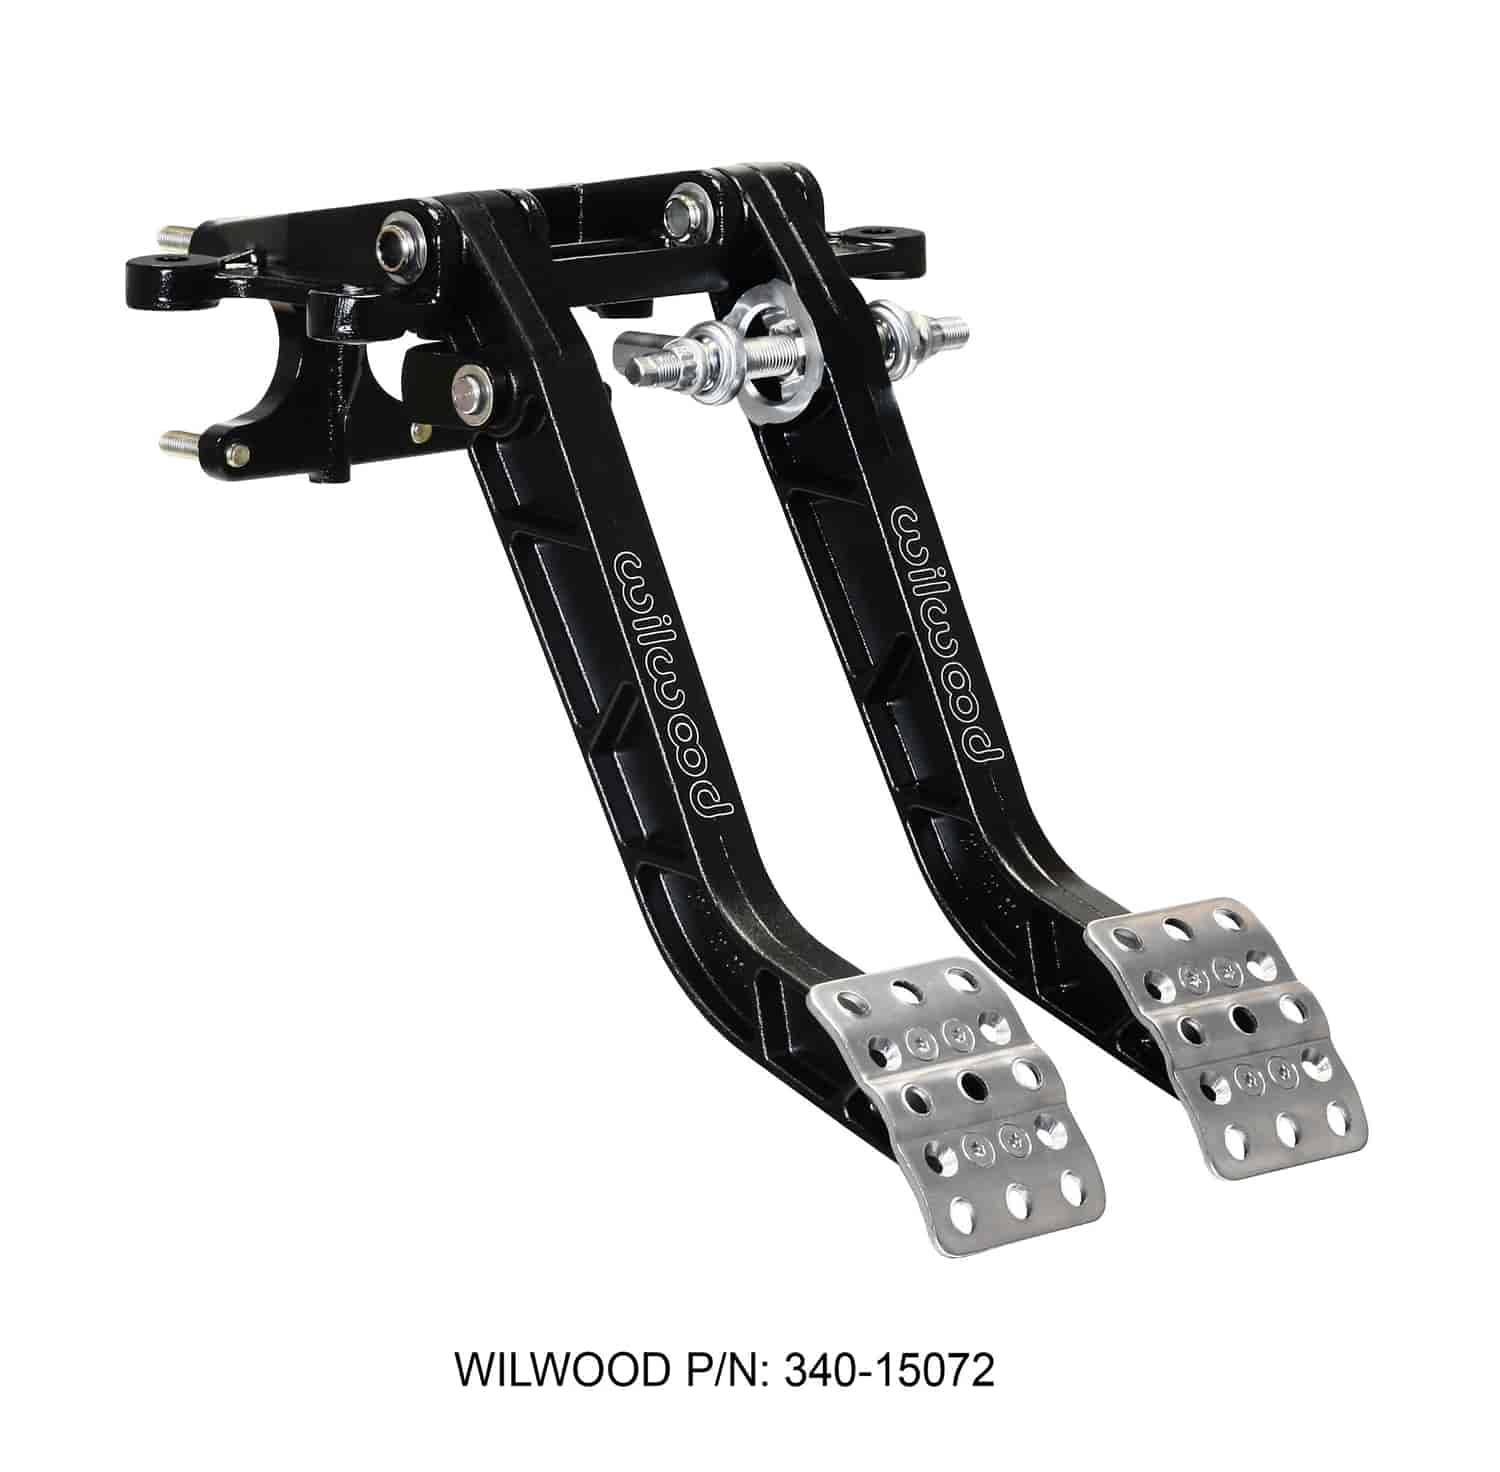 Brake and Clutch Pedal Assembly With Tru-Bar Balance Bar